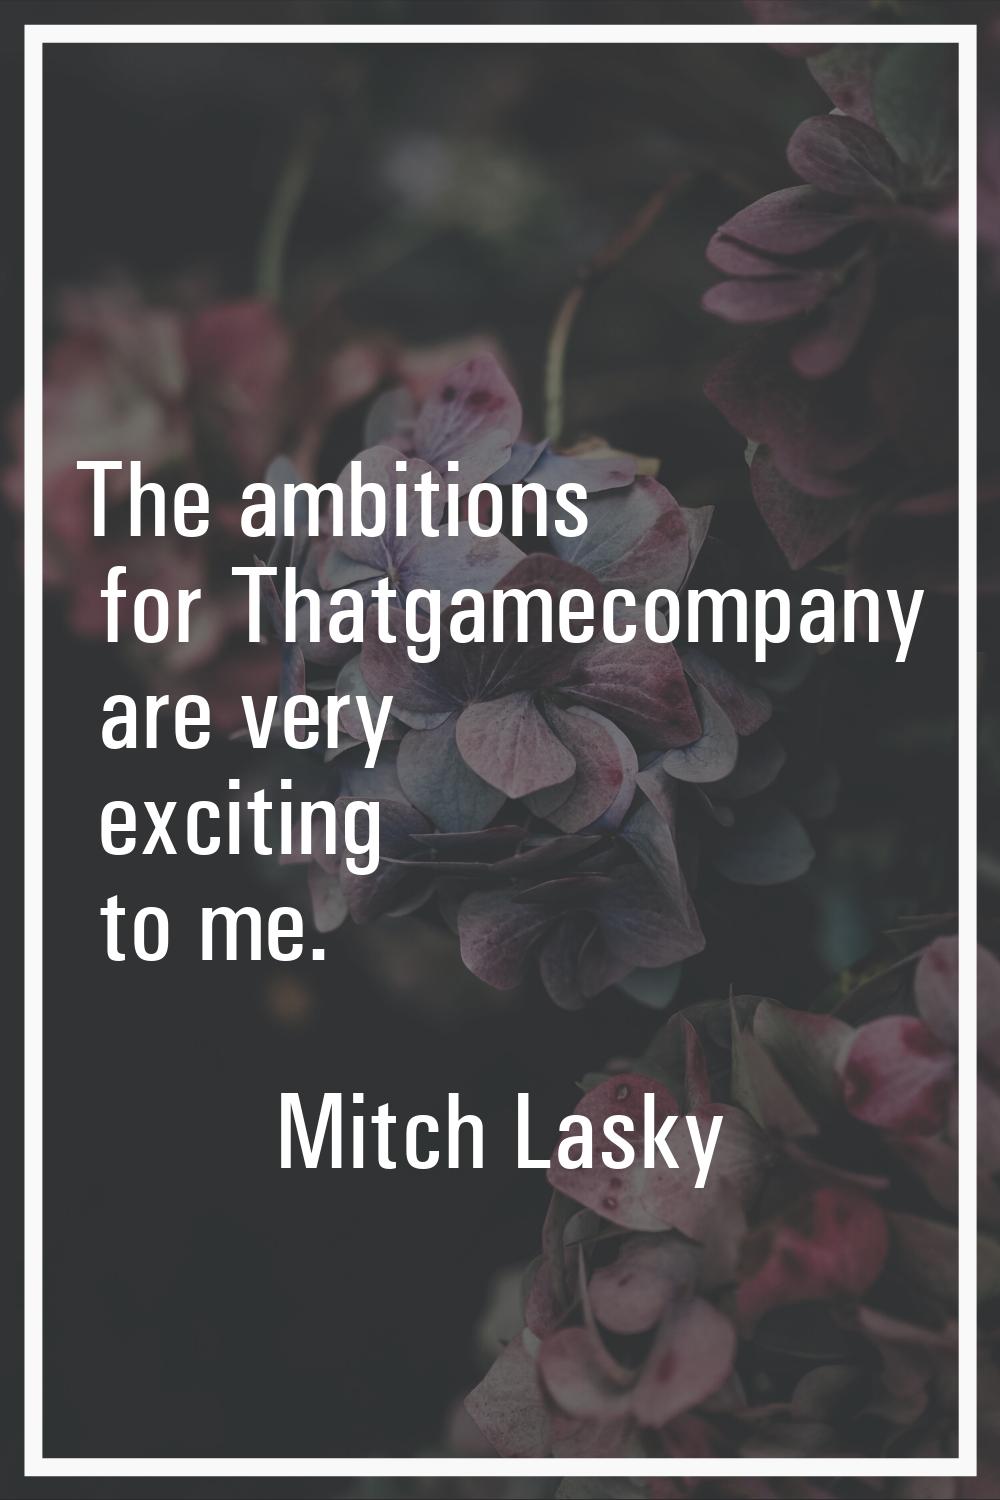 The ambitions for Thatgamecompany are very exciting to me.